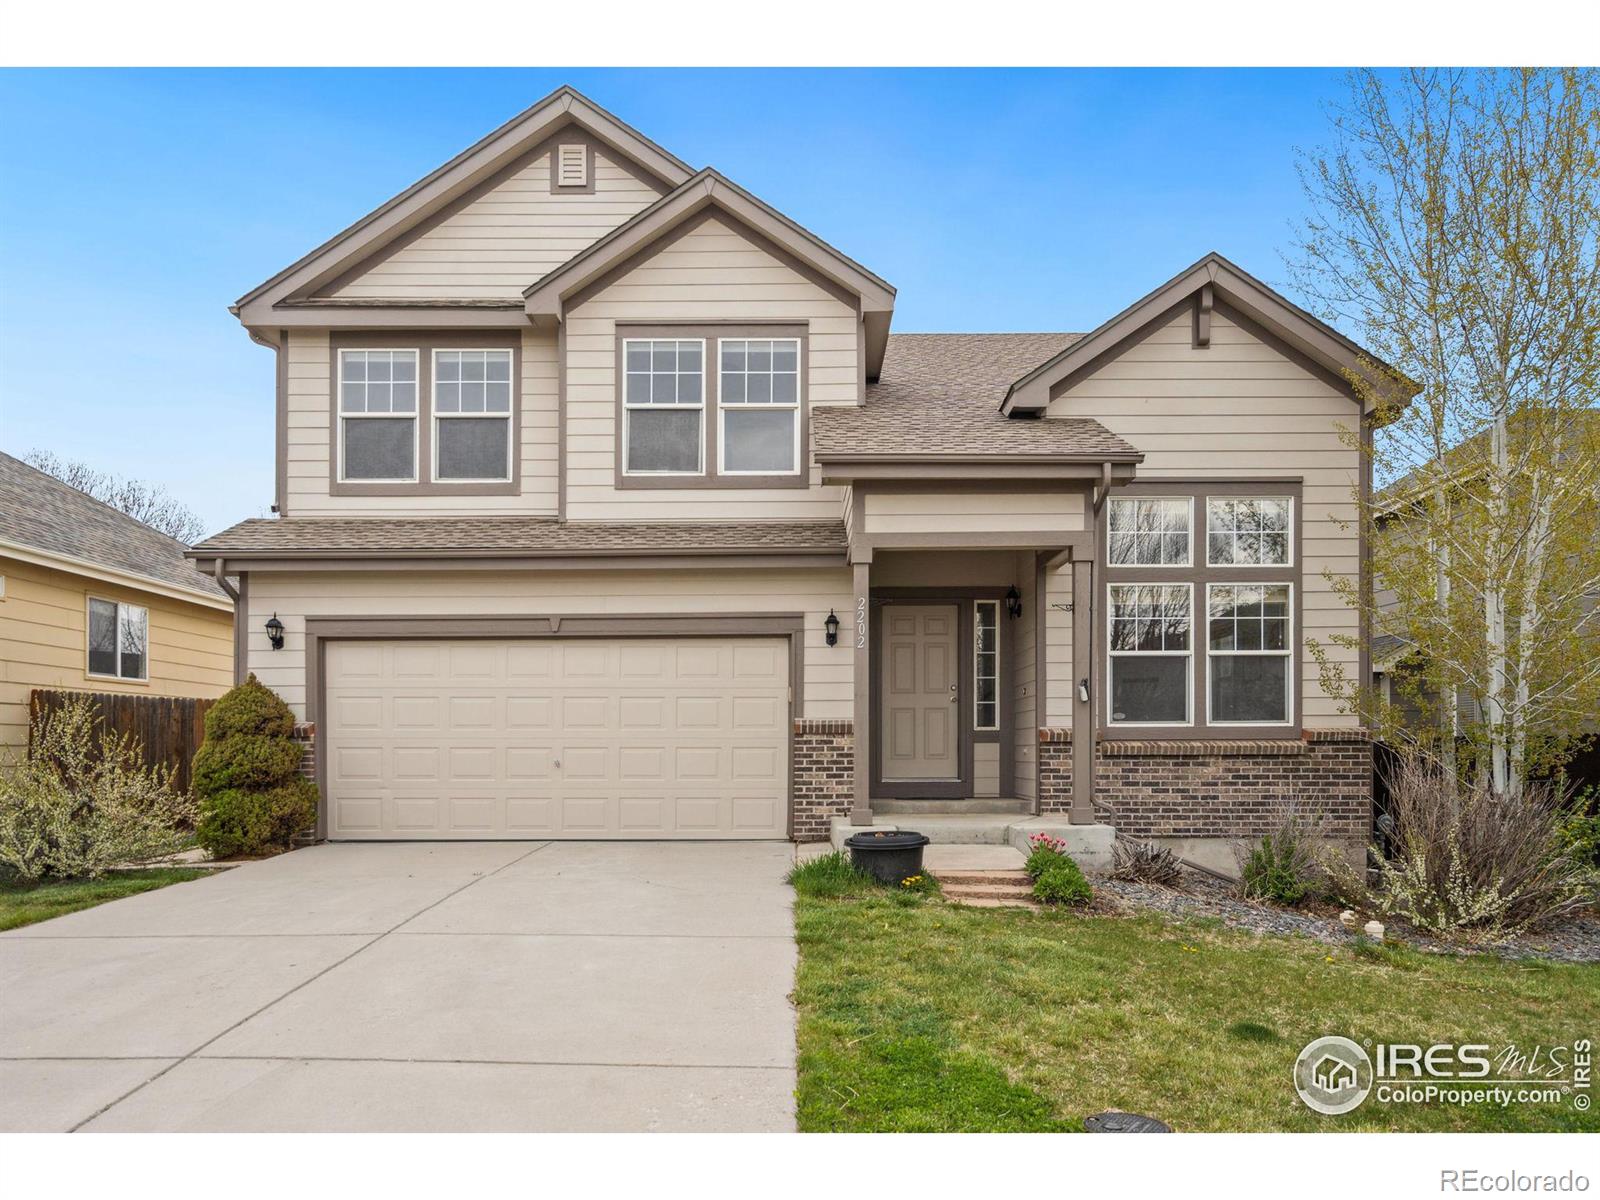 2202  Mainsail Drive, fort collins MLS: 4567891007867 Beds: 3 Baths: 3 Price: $520,000